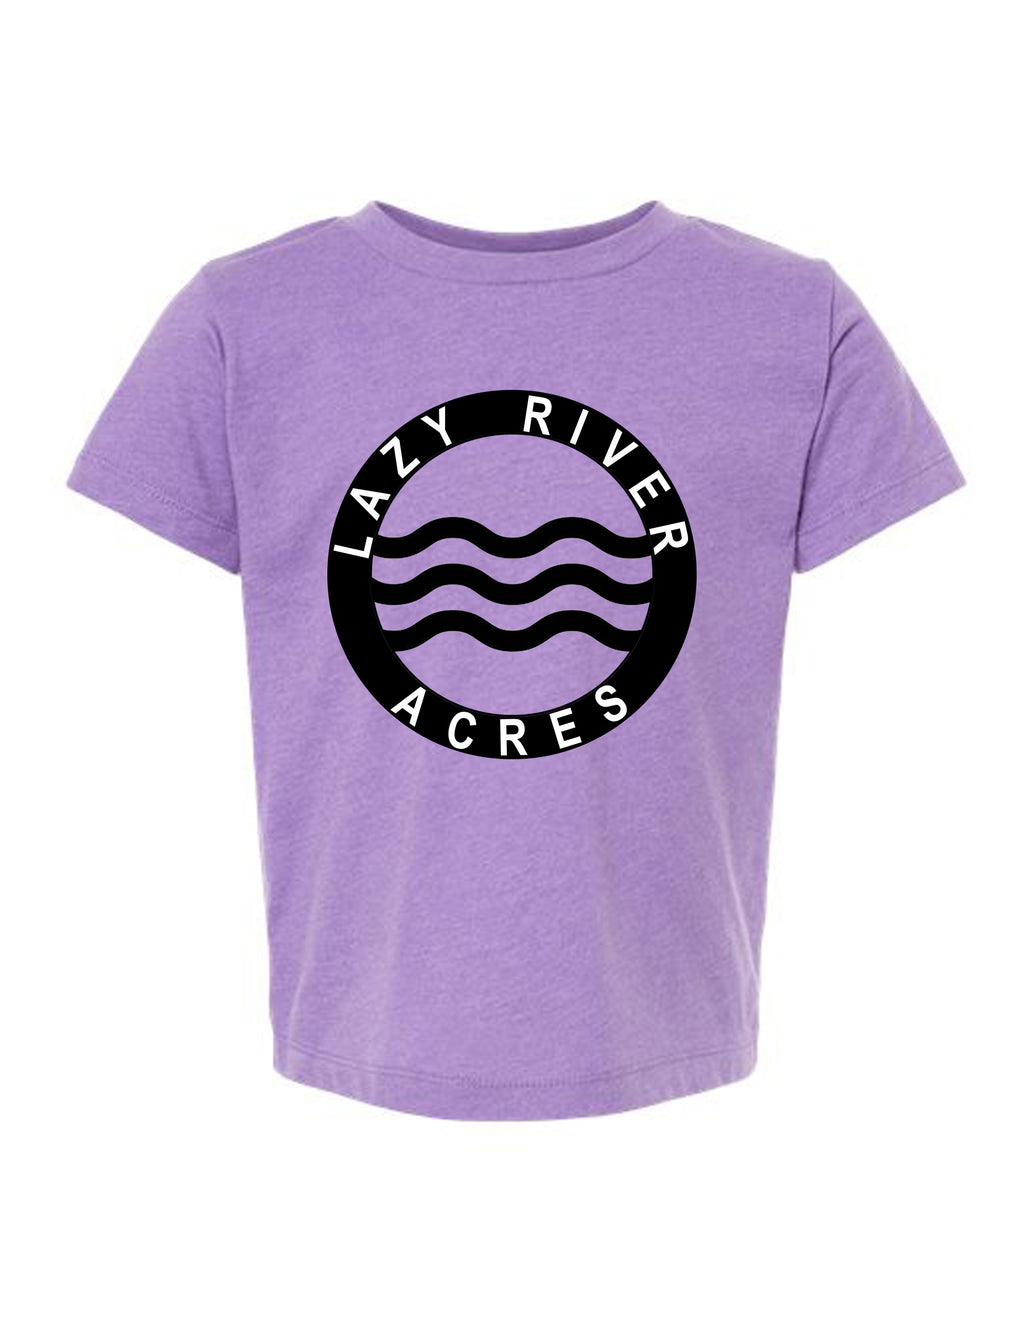 Lazy River Acres Toddler Tee in Heather Purple